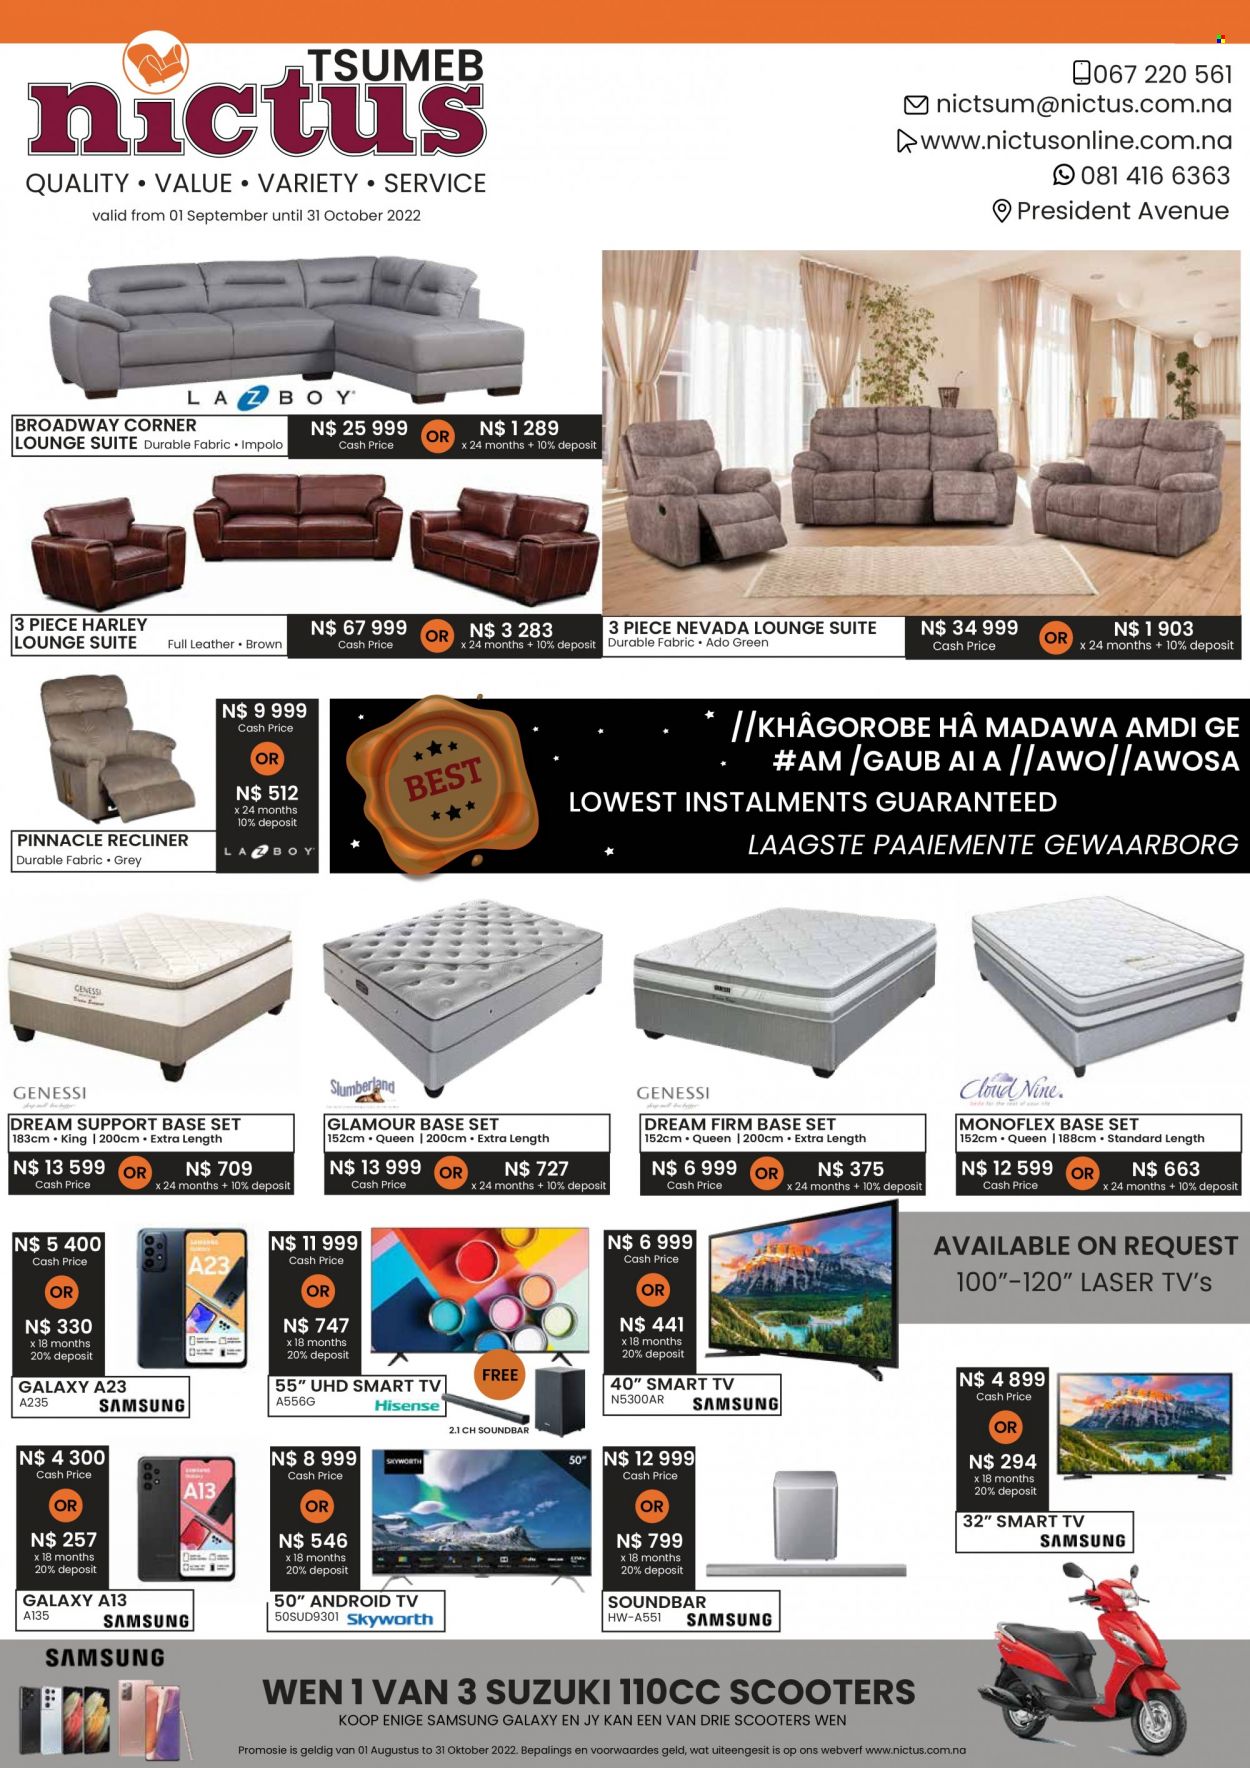 thumbnail - Nictus catalogue  - 01/09/2022 - 31/10/2022 - Sales products - recliner chair, lounge suite, lounge, base set, Samsung Galaxy, Samsung, Android TV, smart tv, UHD TV, TV, sound bar. Page 1.